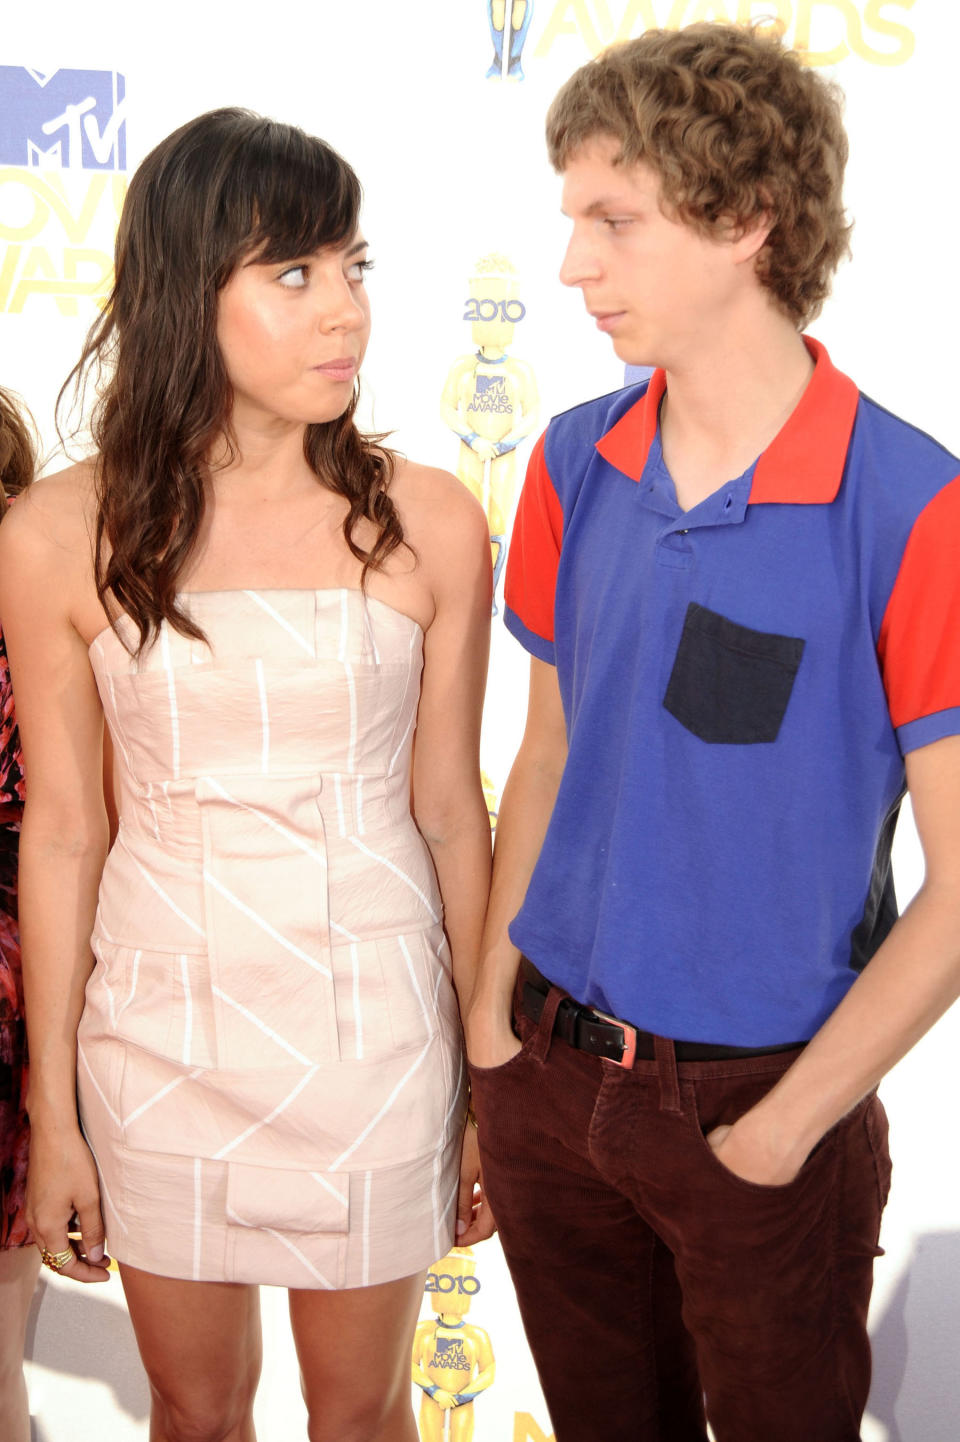 Aubrey Plaza and Michael Cera at the 2010 MTV Movie Awards at Gibson Amphitheatre on June 6, 2010, in Universal City, California.